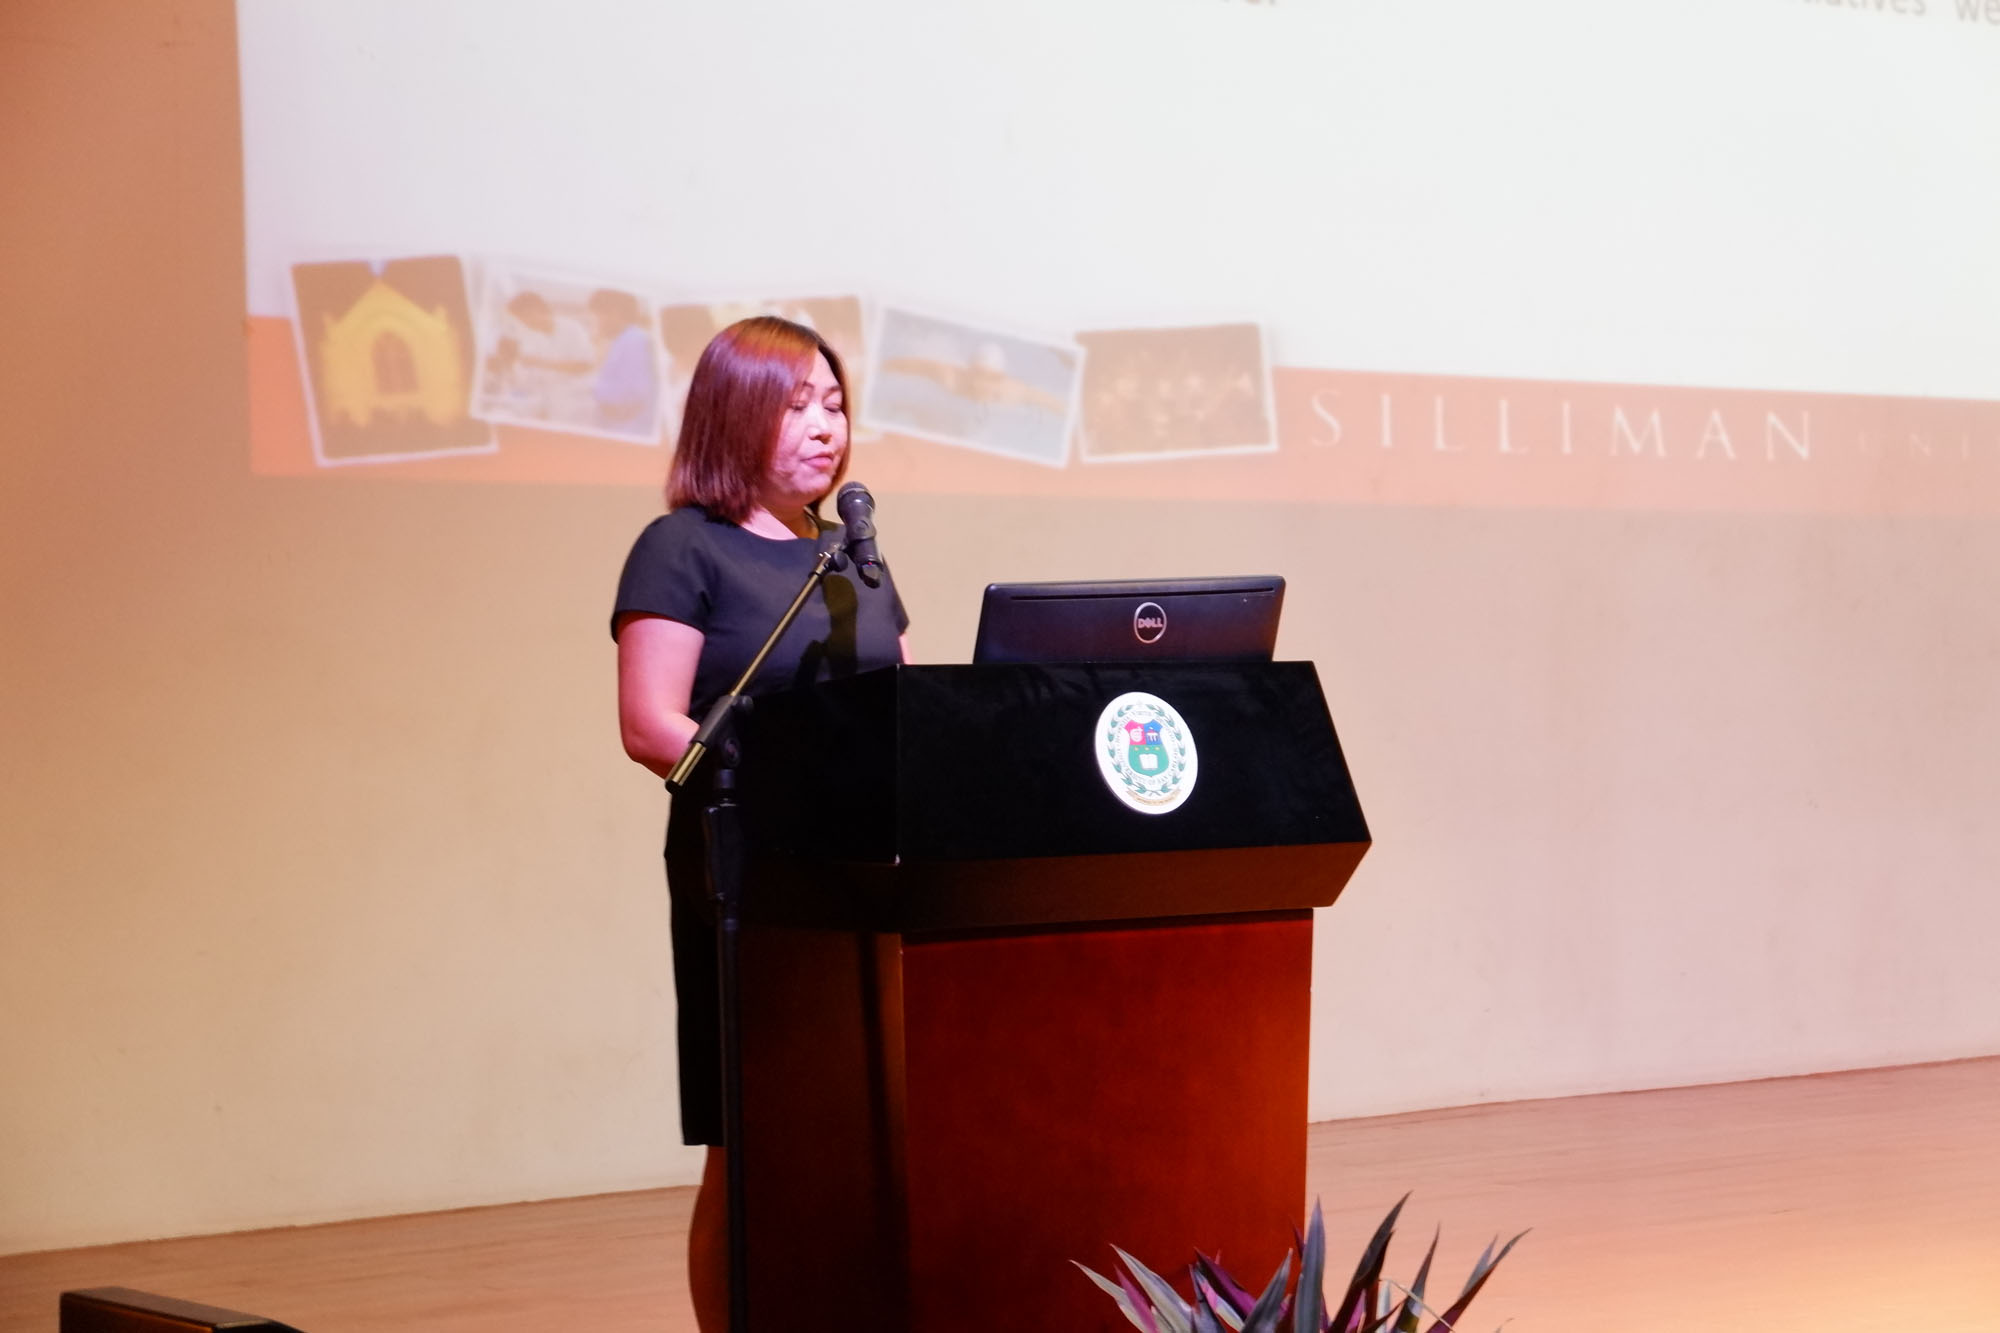 PASCN Regional Symposium on Disruptive Technologies: Opportunities, Challenges, and Risks-pascn-usc-37-20190123.jpg